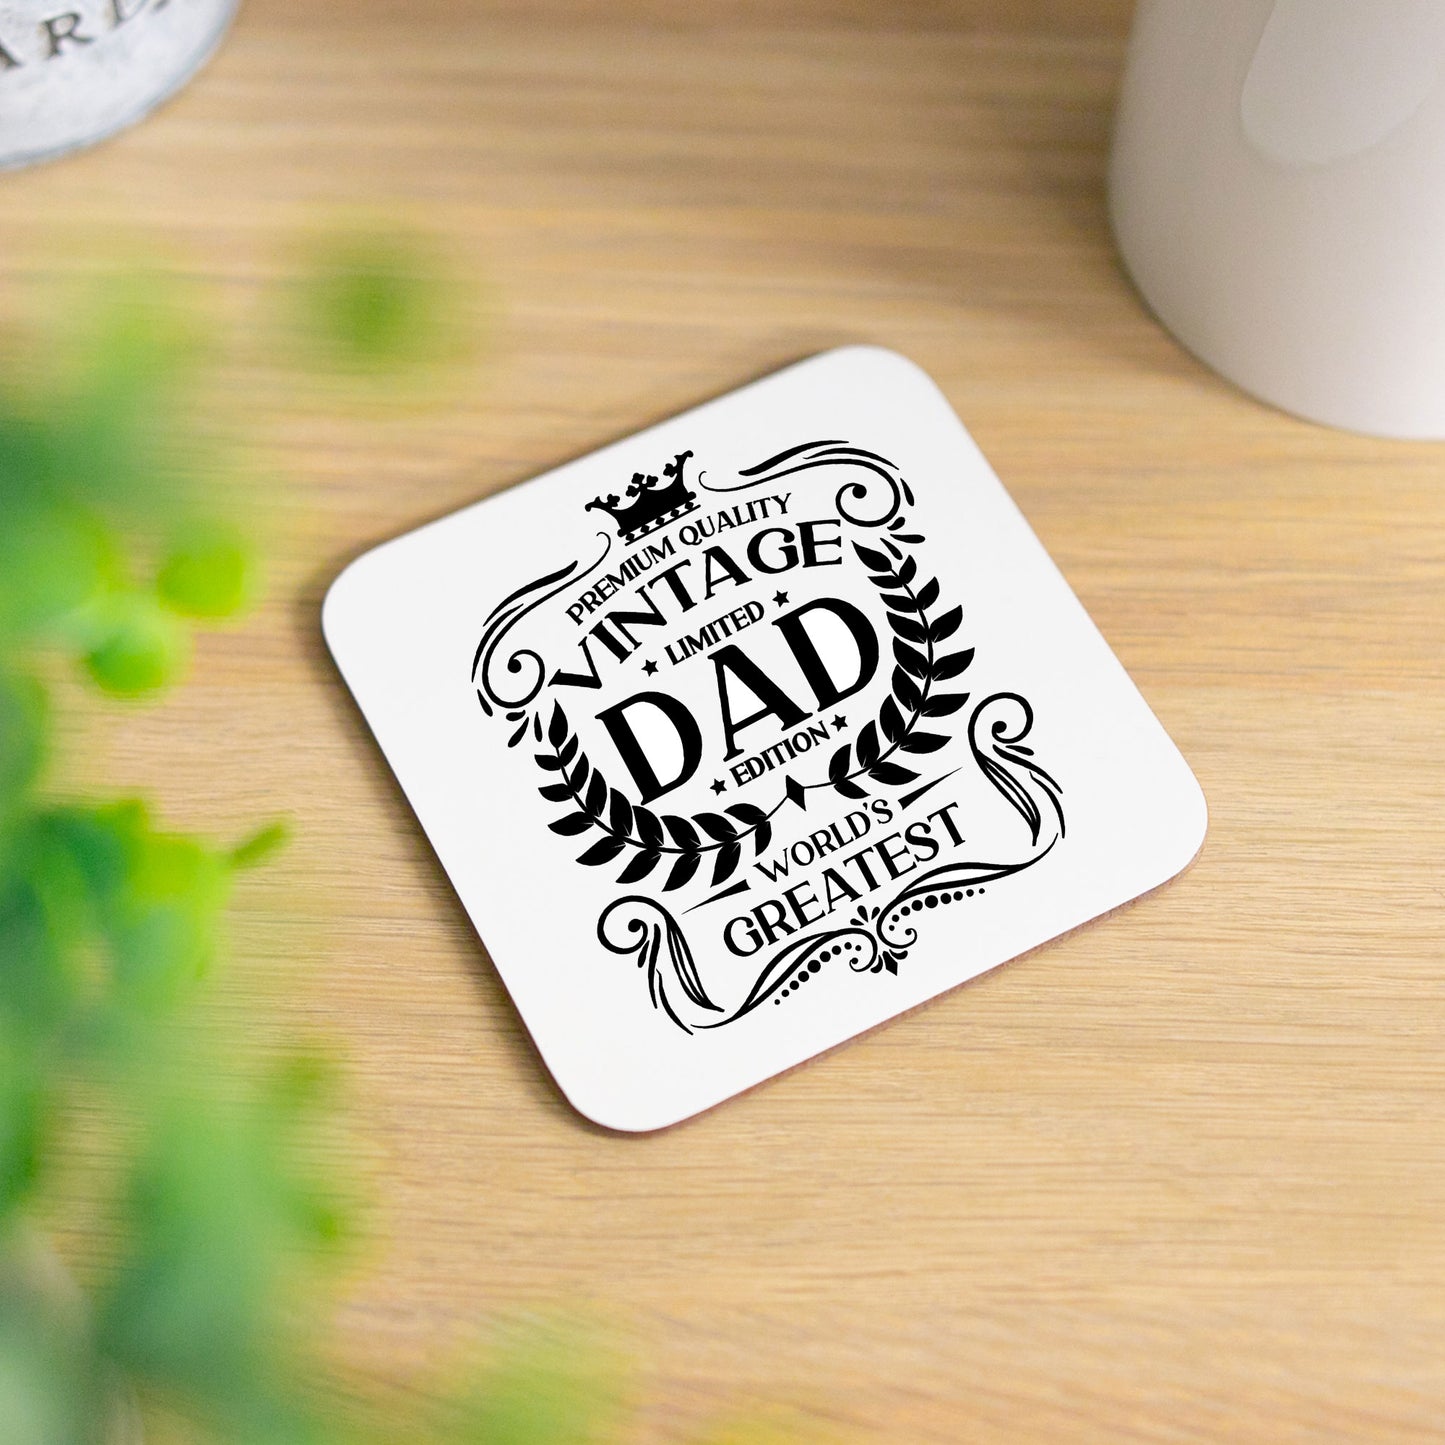 Vintage World's Greatest Dad Engraved Gin Glass Gift  - Always Looking Good - Glass & Printed Coaster  